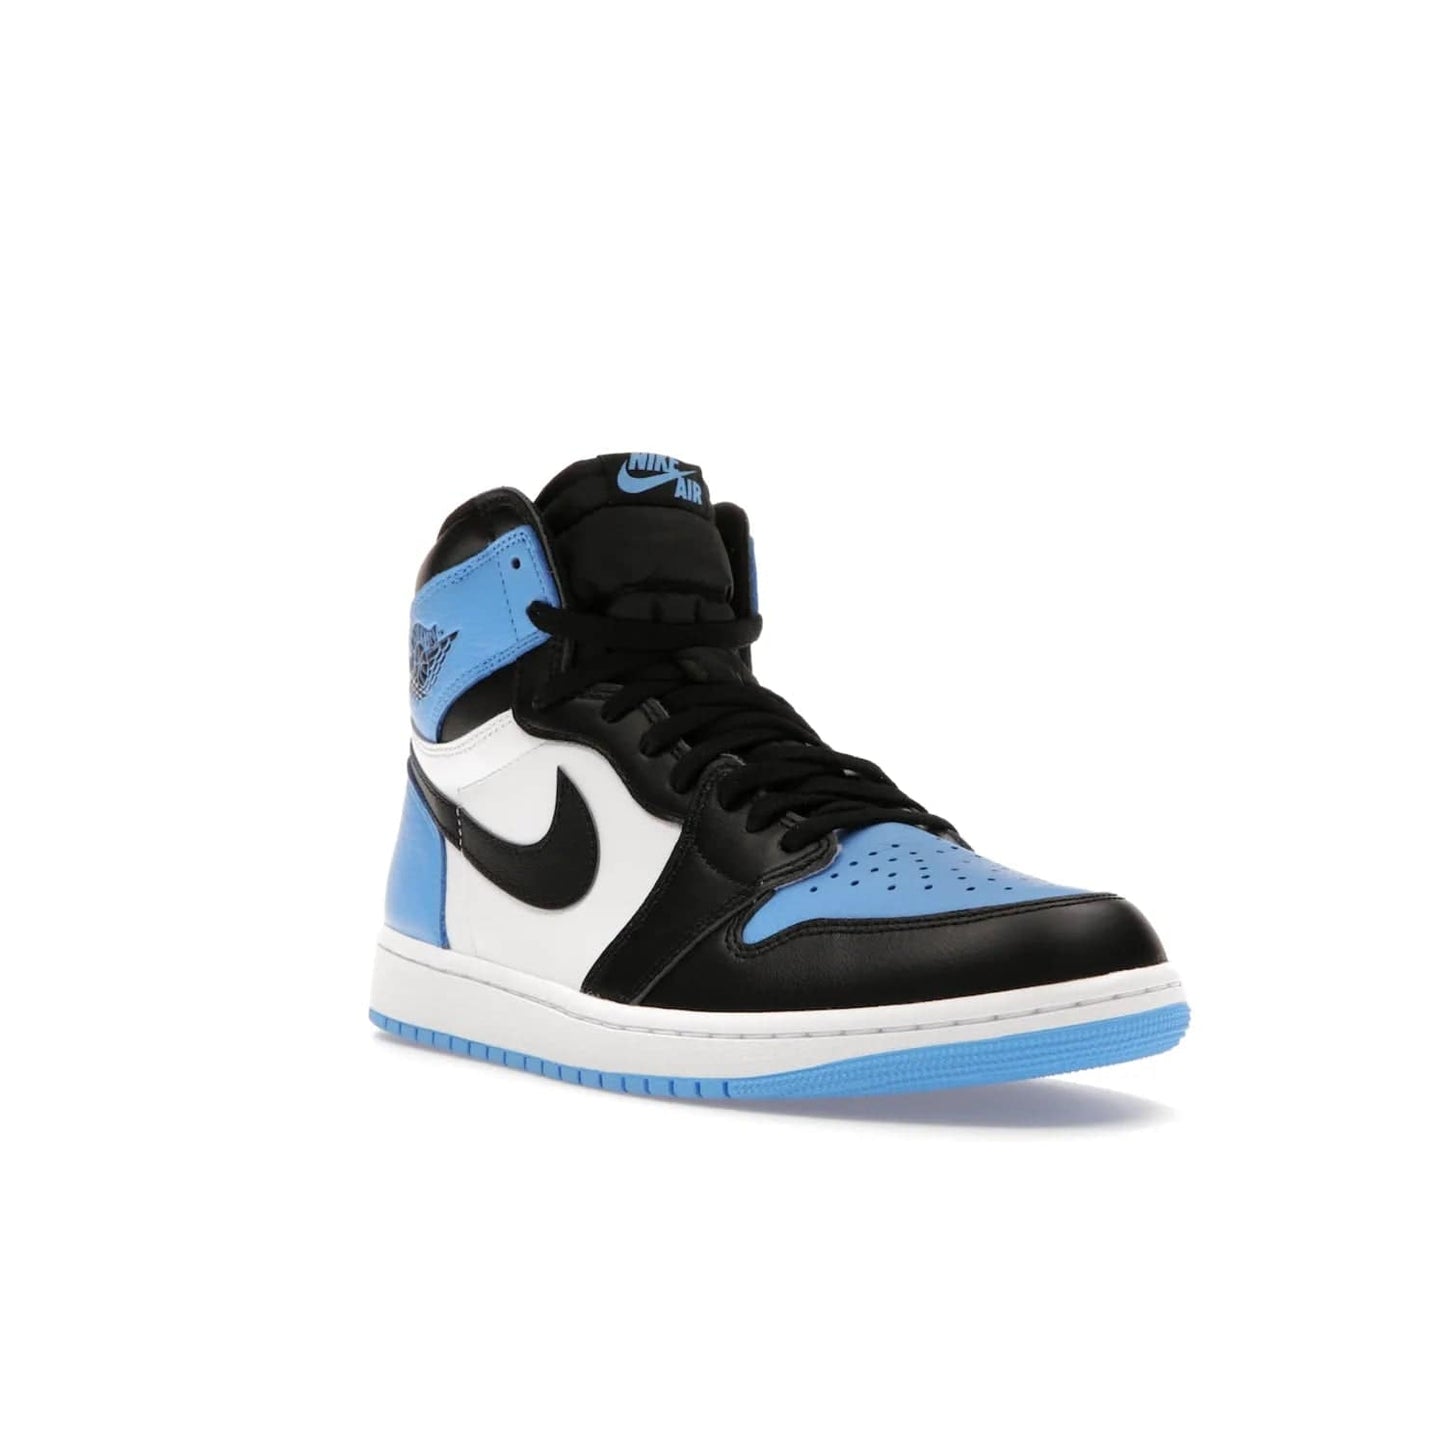 Jordan 1 Retro High OG UNC Toe - Image 6 - Only at www.BallersClubKickz.com - Jordan 1 High OG UNC Toe is a fashionable, high-quality sneaker featuring University Blue, Black White and White. Releasing July 22, 2023, it's the perfect pick up for sneakerheads.